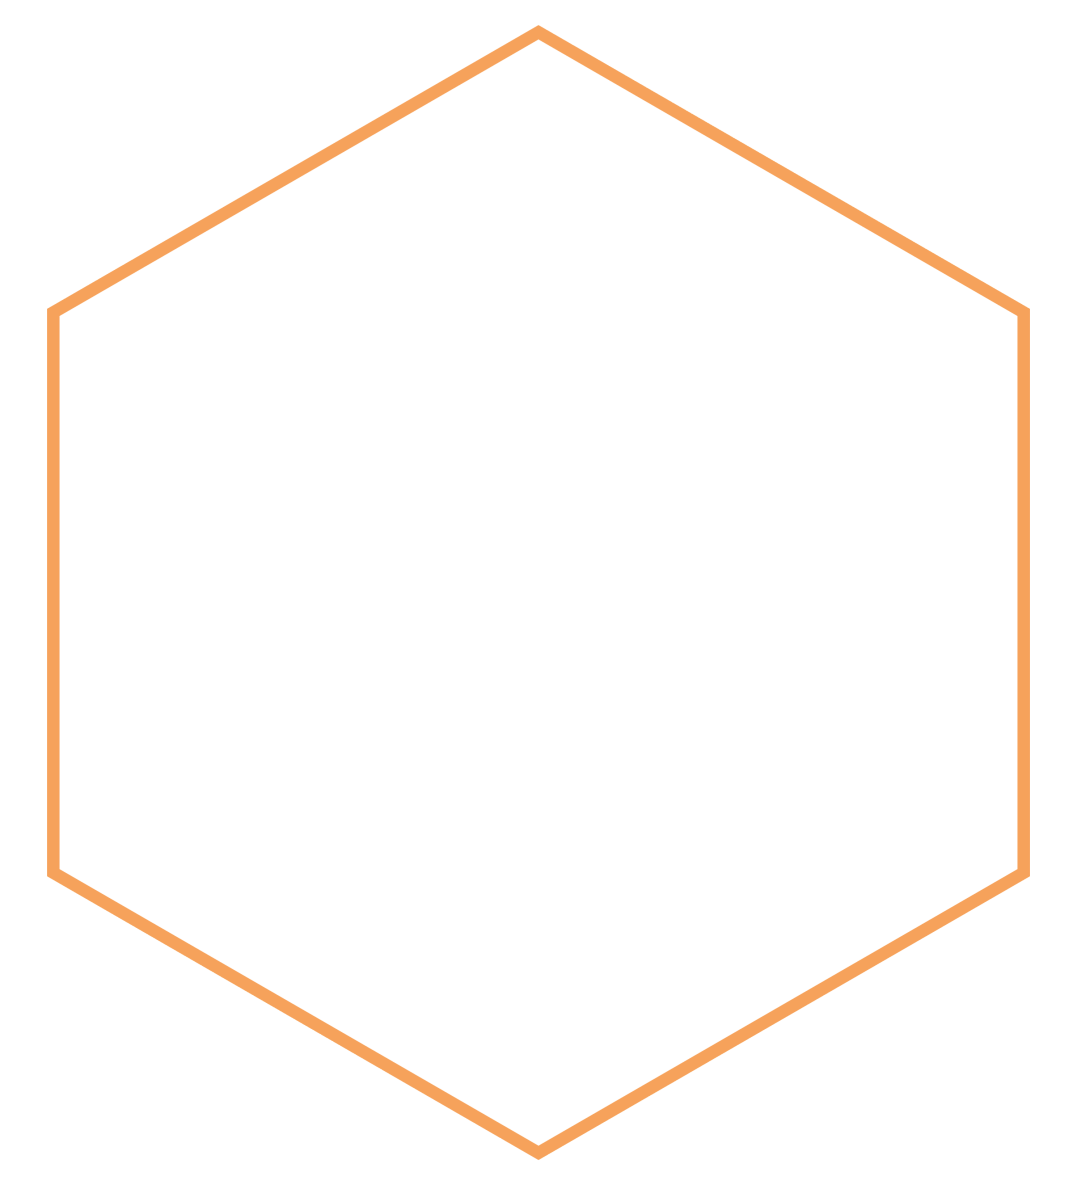 Fusing operational best practice, industry standards, an intimate awareness of future-concepts, and real-world experience, our team provides IDD solutions to a range of clients.